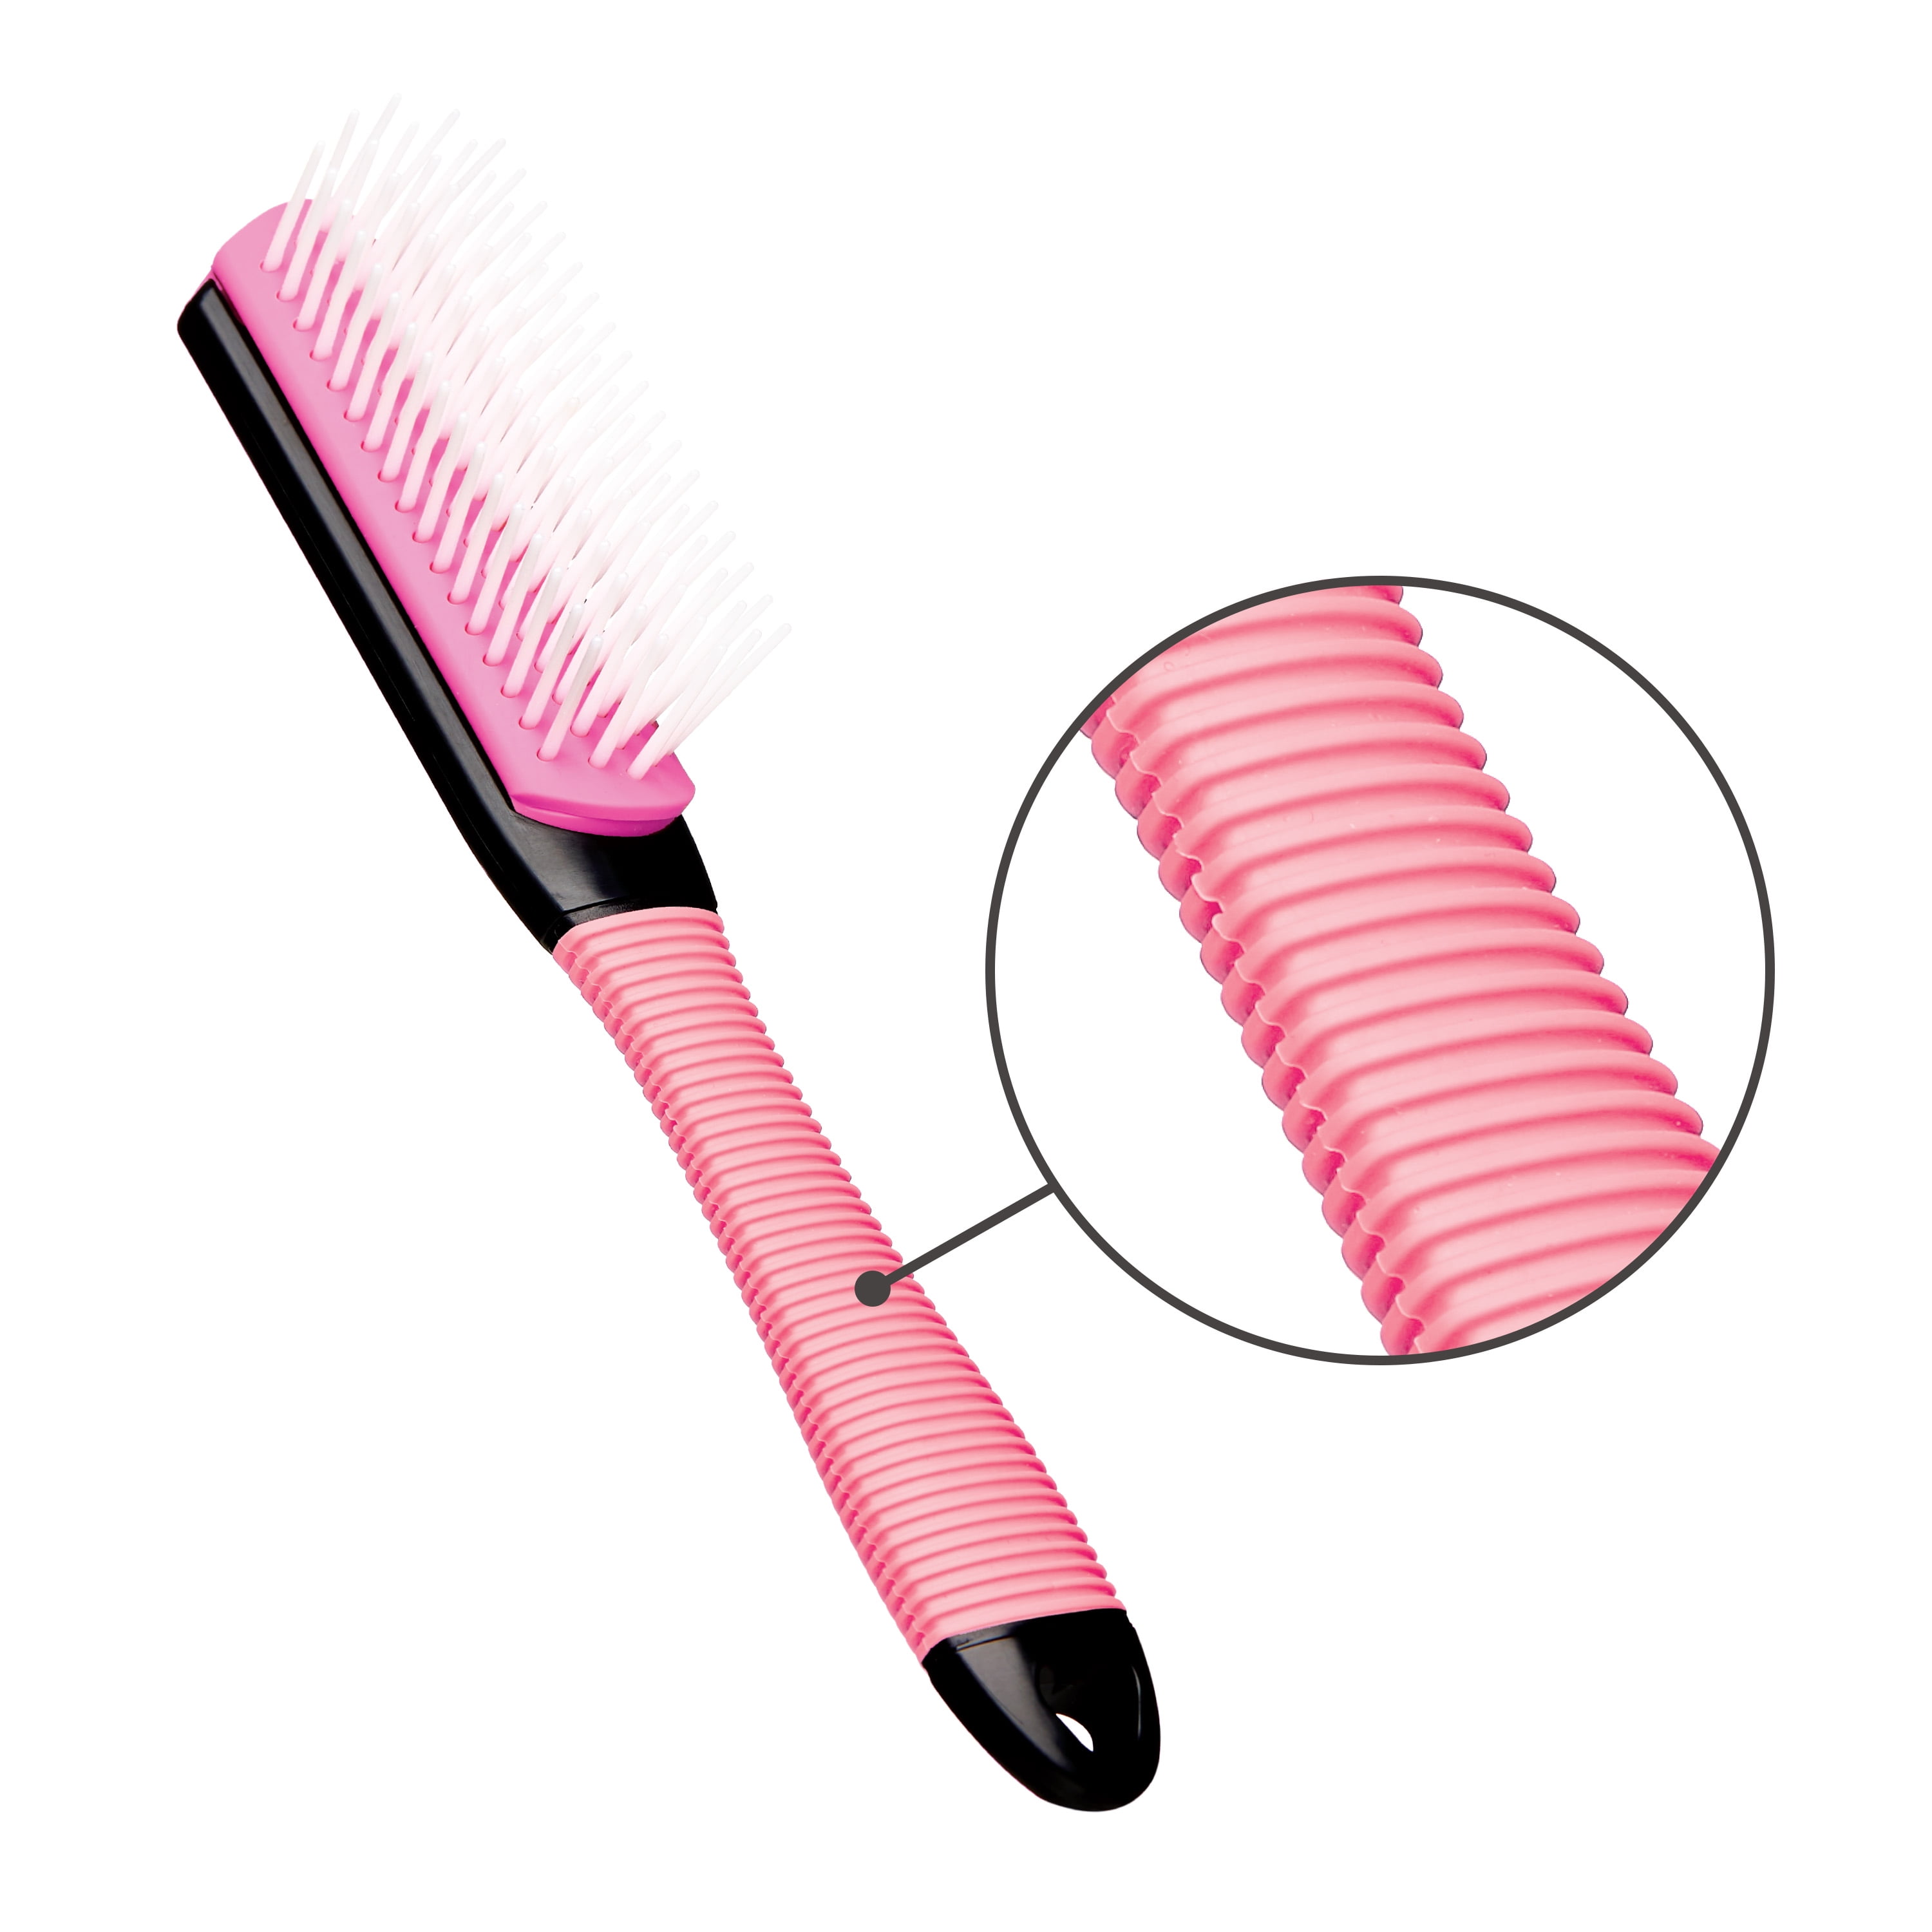 Get your Decker Pink & Black Brush at Smith & Edwards!